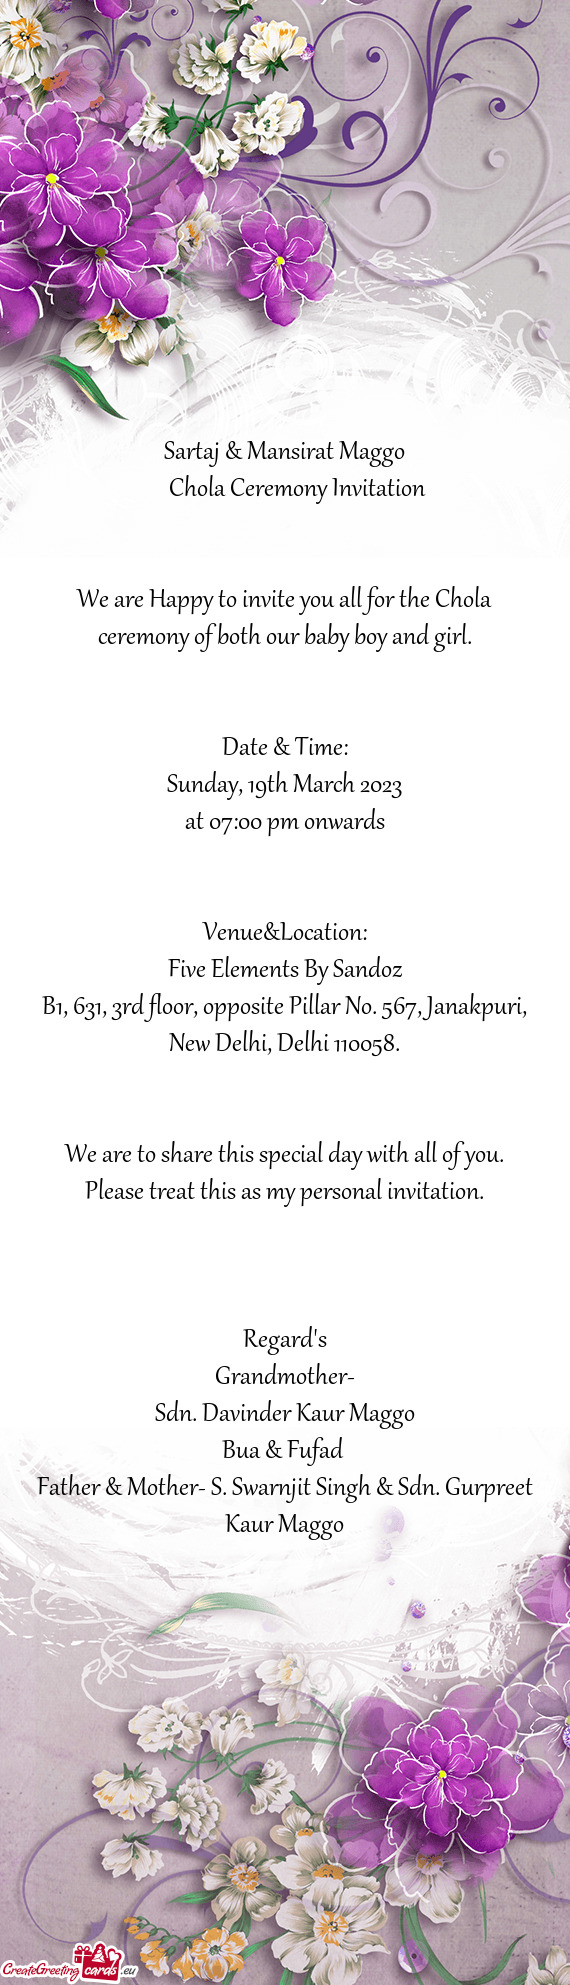 We are Happy to invite you all for the Chola ceremony of both our baby boy and girl